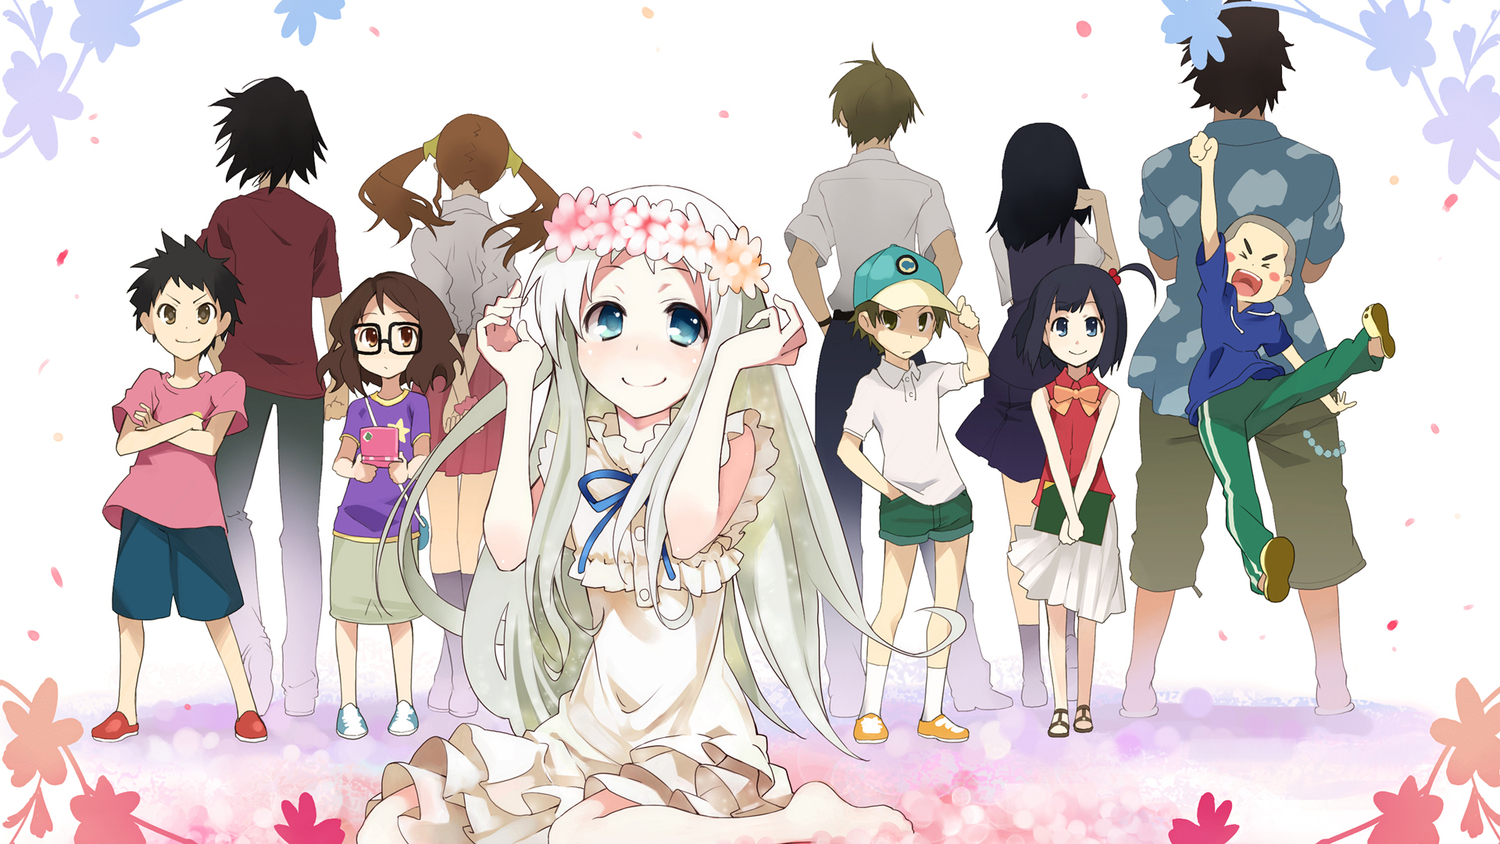 Anohana Backgrounds, Compatible - PC, Mobile, Gadgets| 1500x844 px